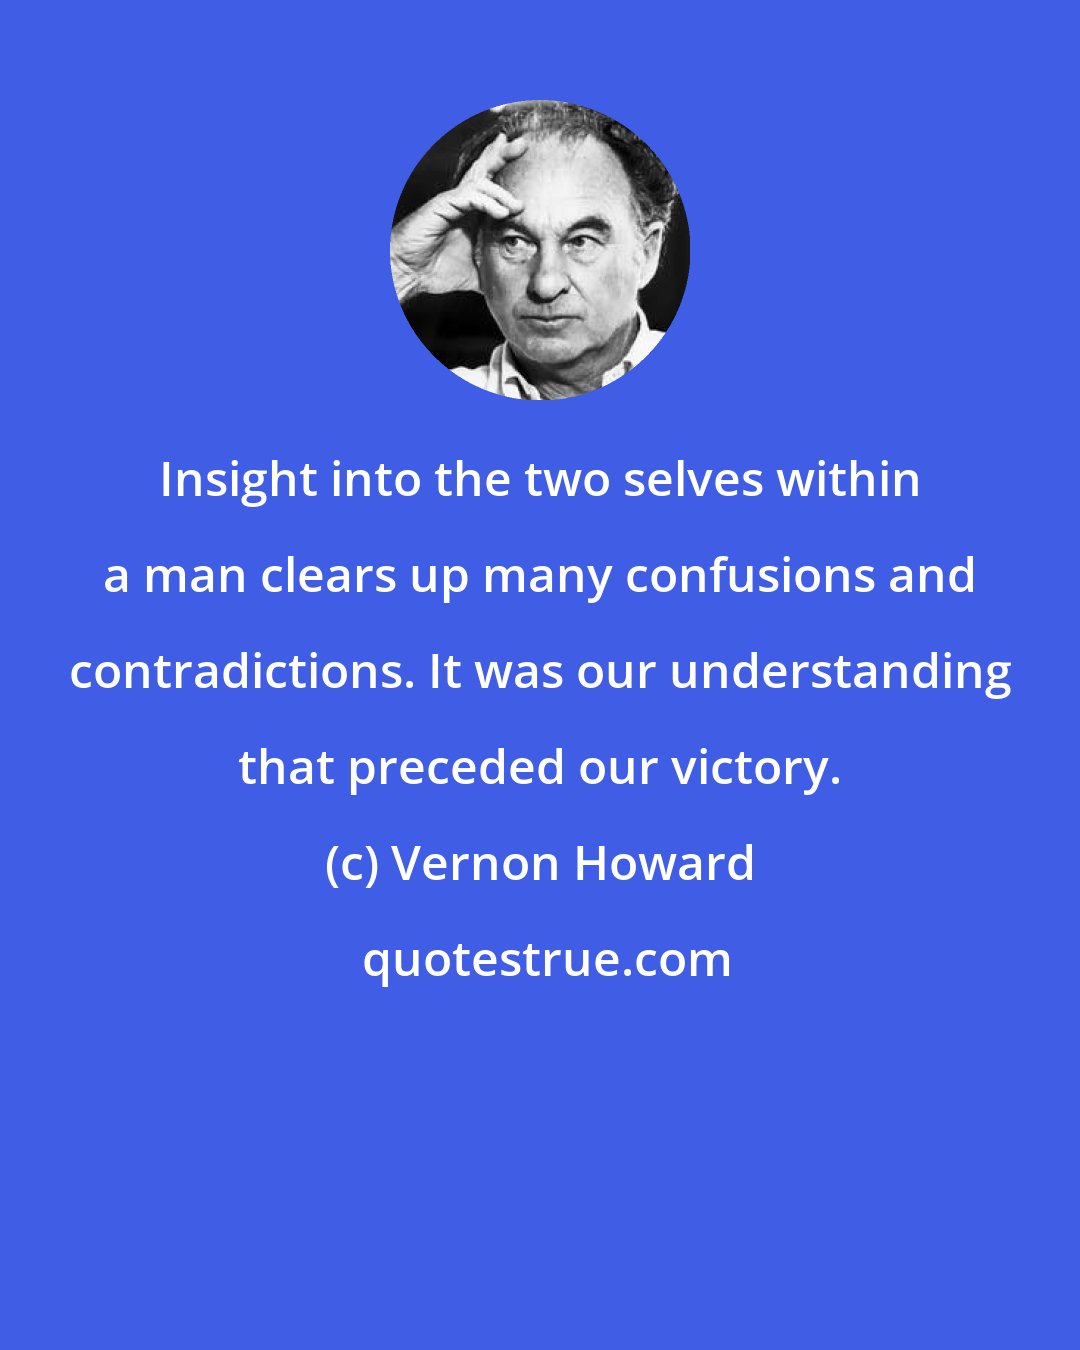 Vernon Howard: Insight into the two selves within a man clears up many confusions and contradictions. It was our understanding that preceded our victory.